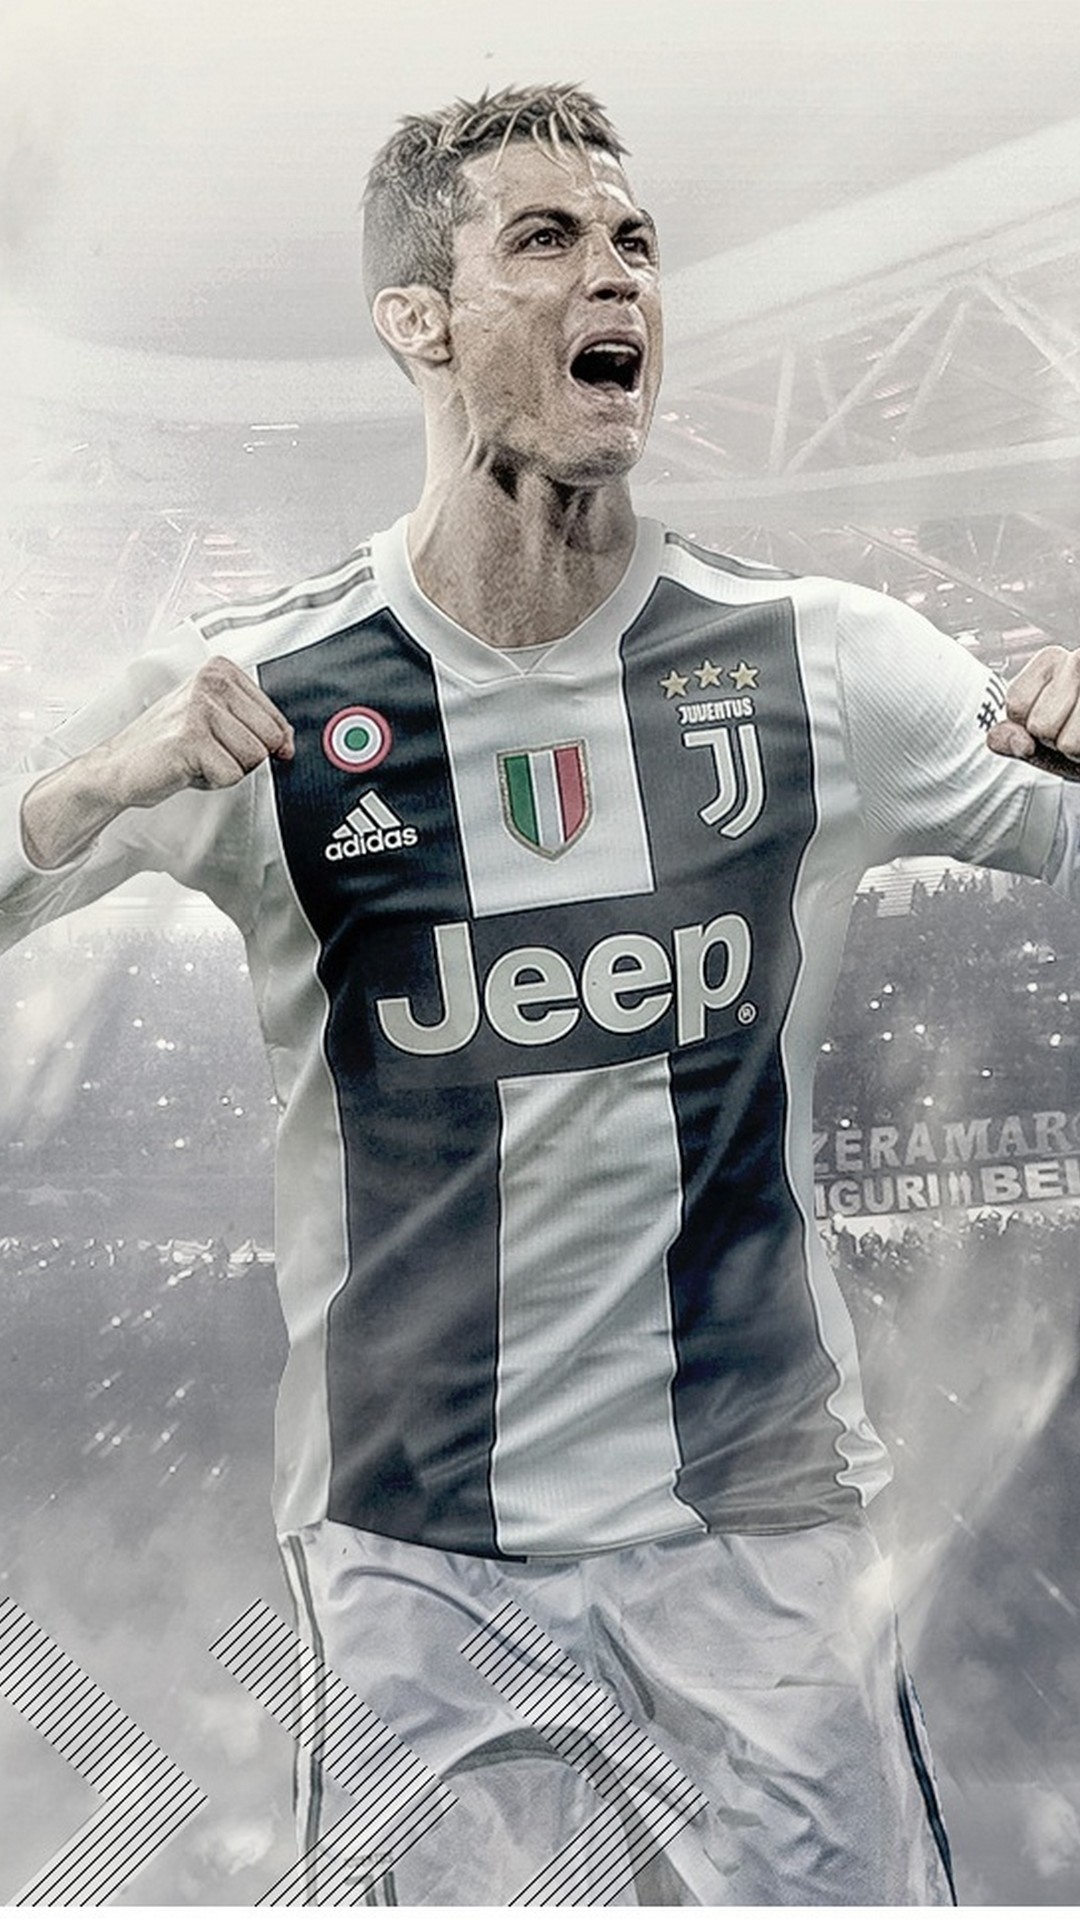 Wallpaper Android Cristiano Ronaldo Juventus with resolution 1080X1920 pixel. You can make this wallpaper for your Android backgrounds, Tablet, Smartphones Screensavers and Mobile Phone Lock Screen